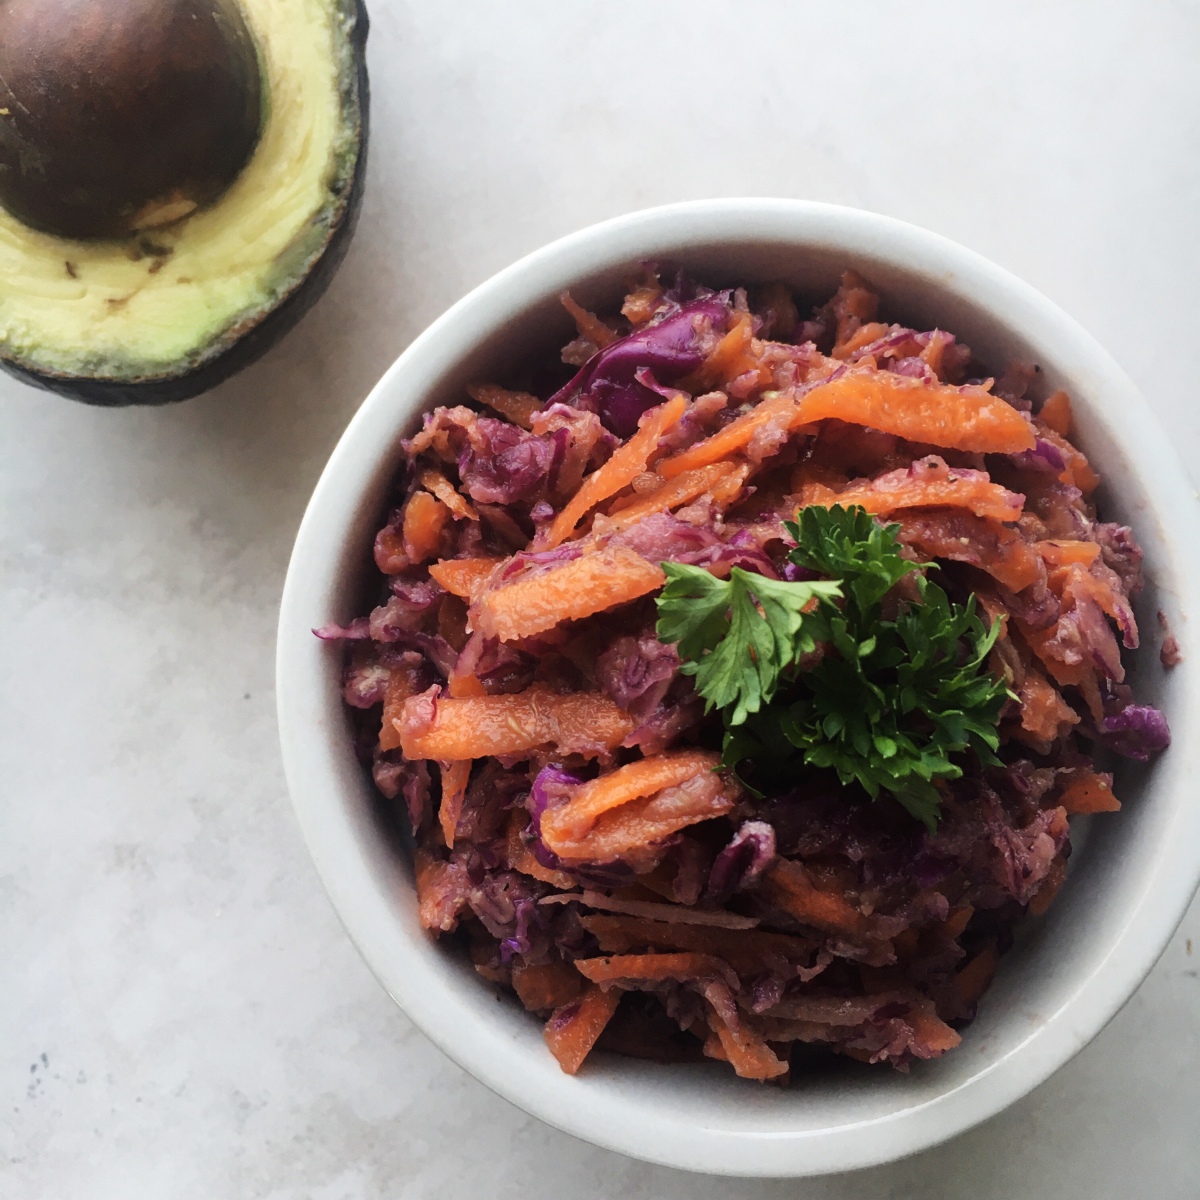 Carrot and Cabbage Slaw